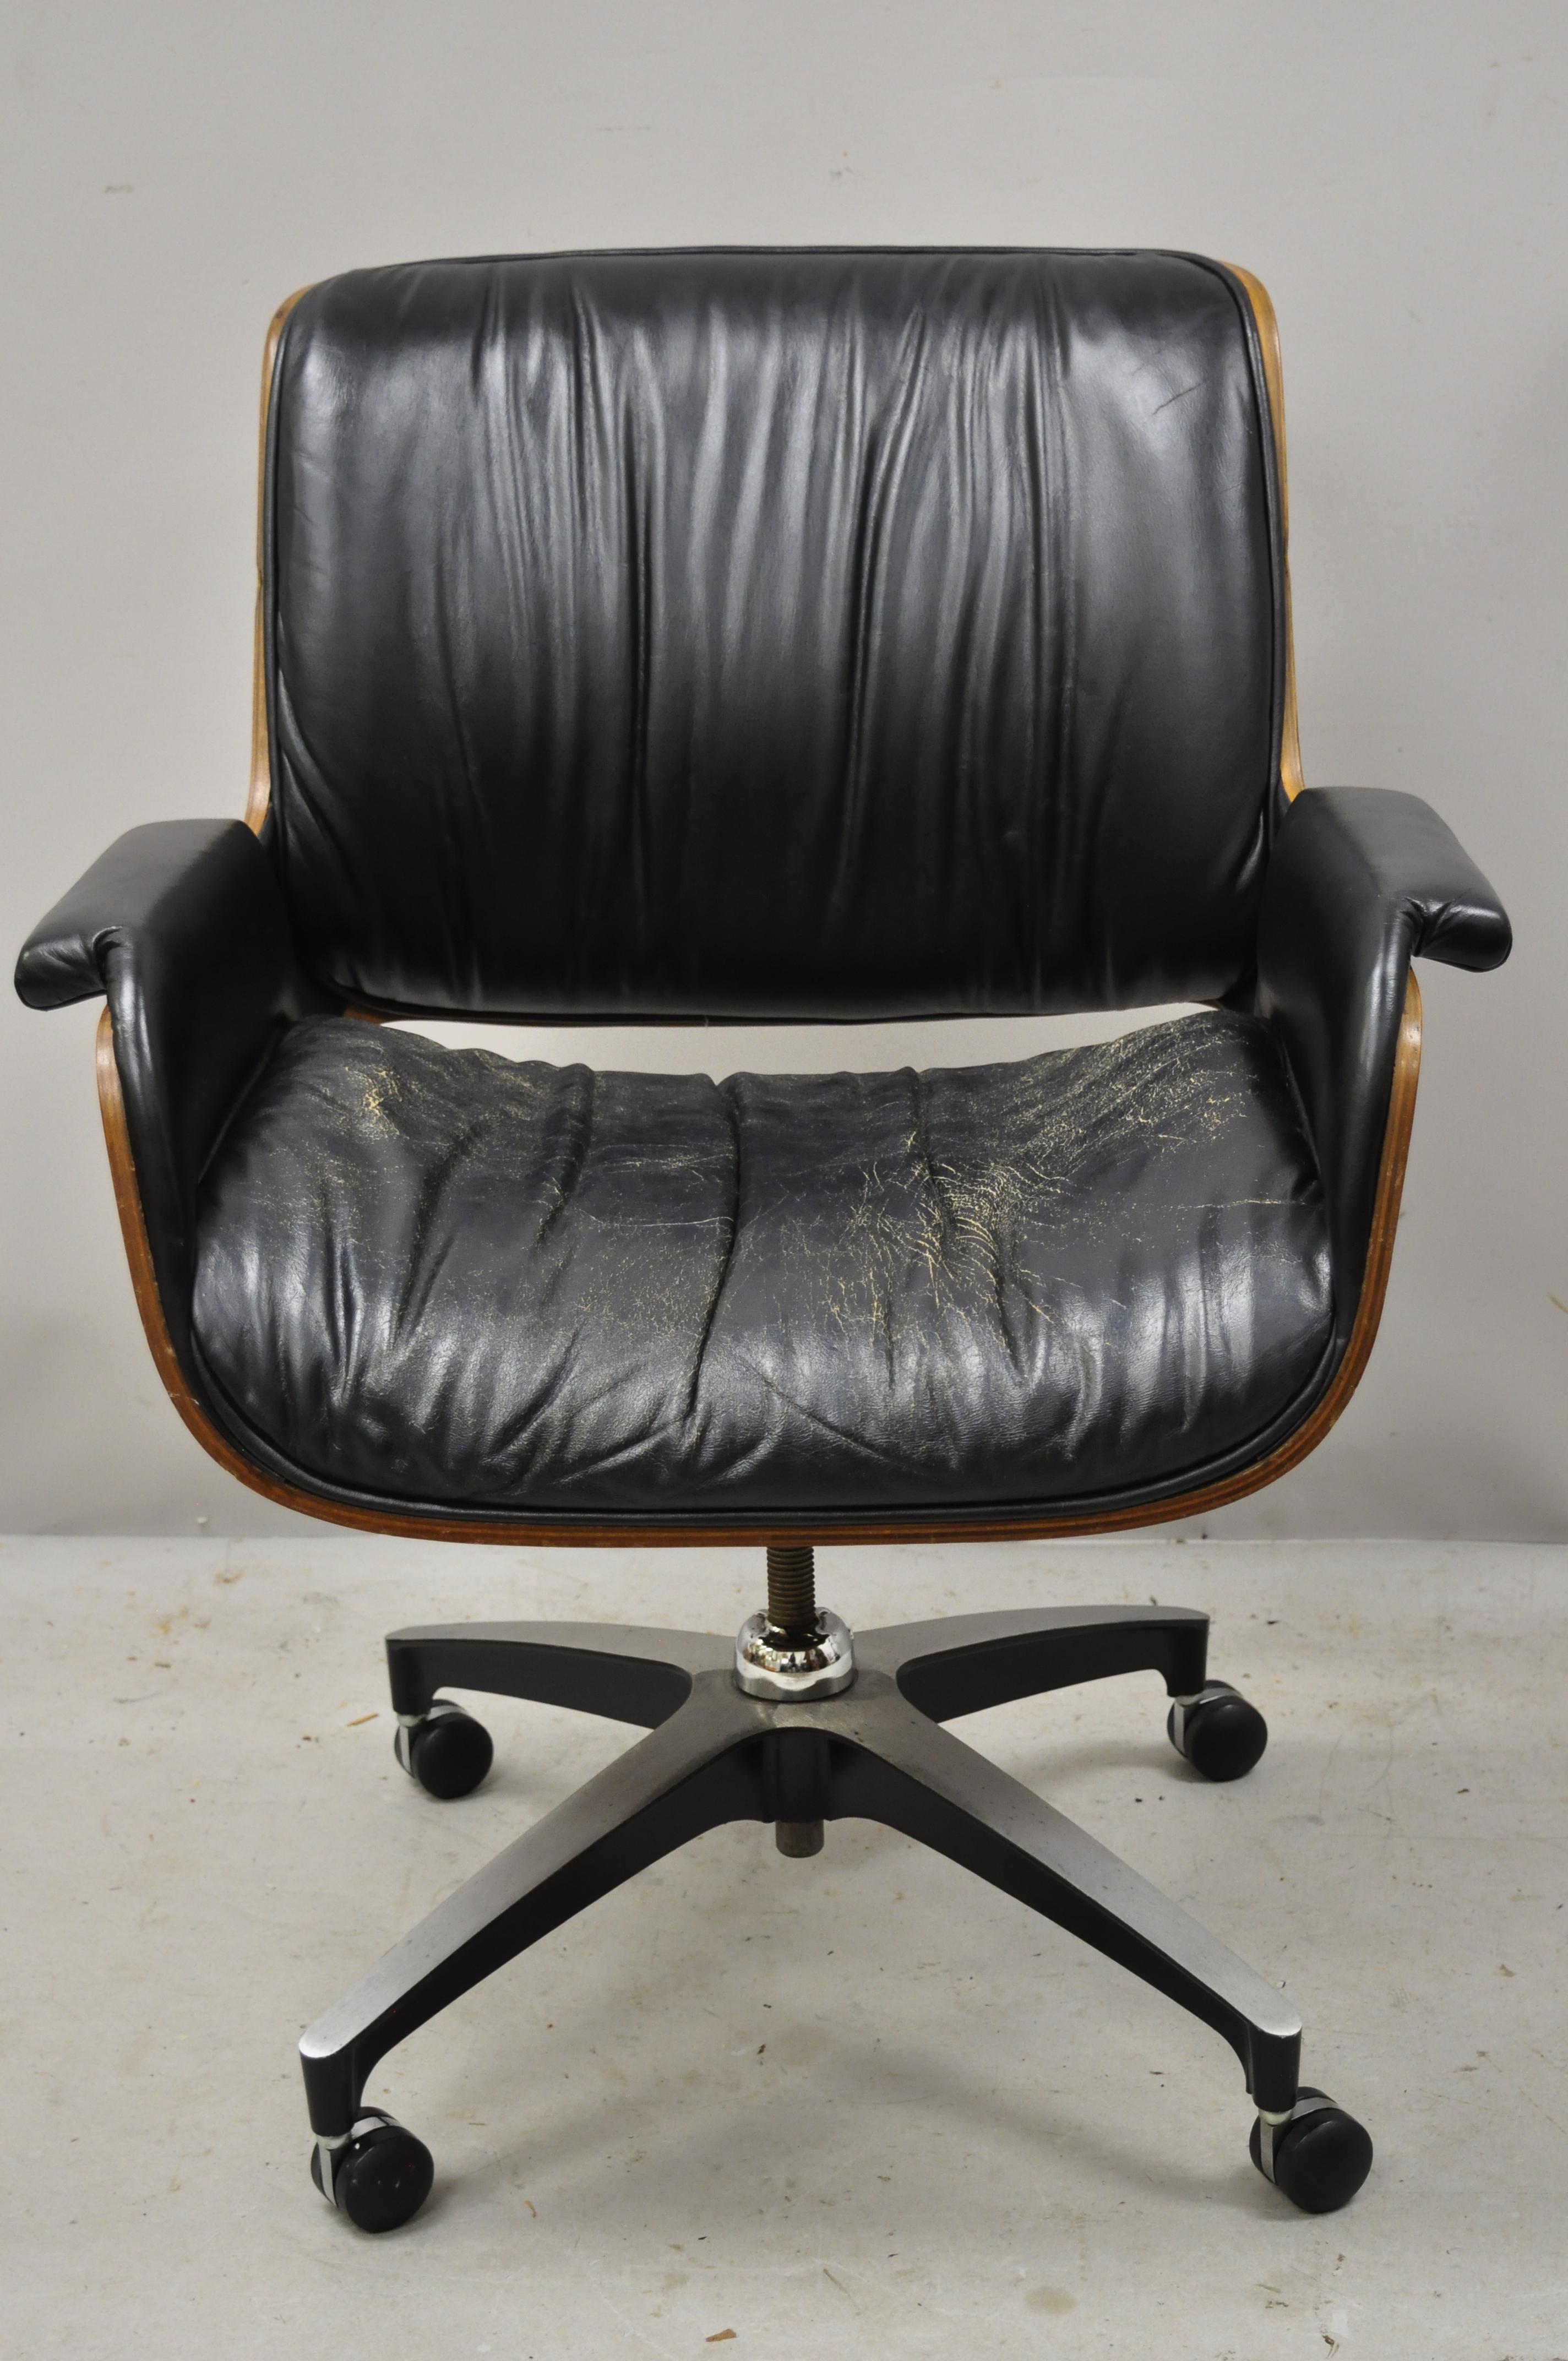 Mid-Century Modern George Mulhauser for Plycraft black leather bentwood office desk chair. Item features rolling casters, adjustable height, bent ply frame, swivel seat, beautiful wood grain, leather upholstery, clean modernist lines, quality